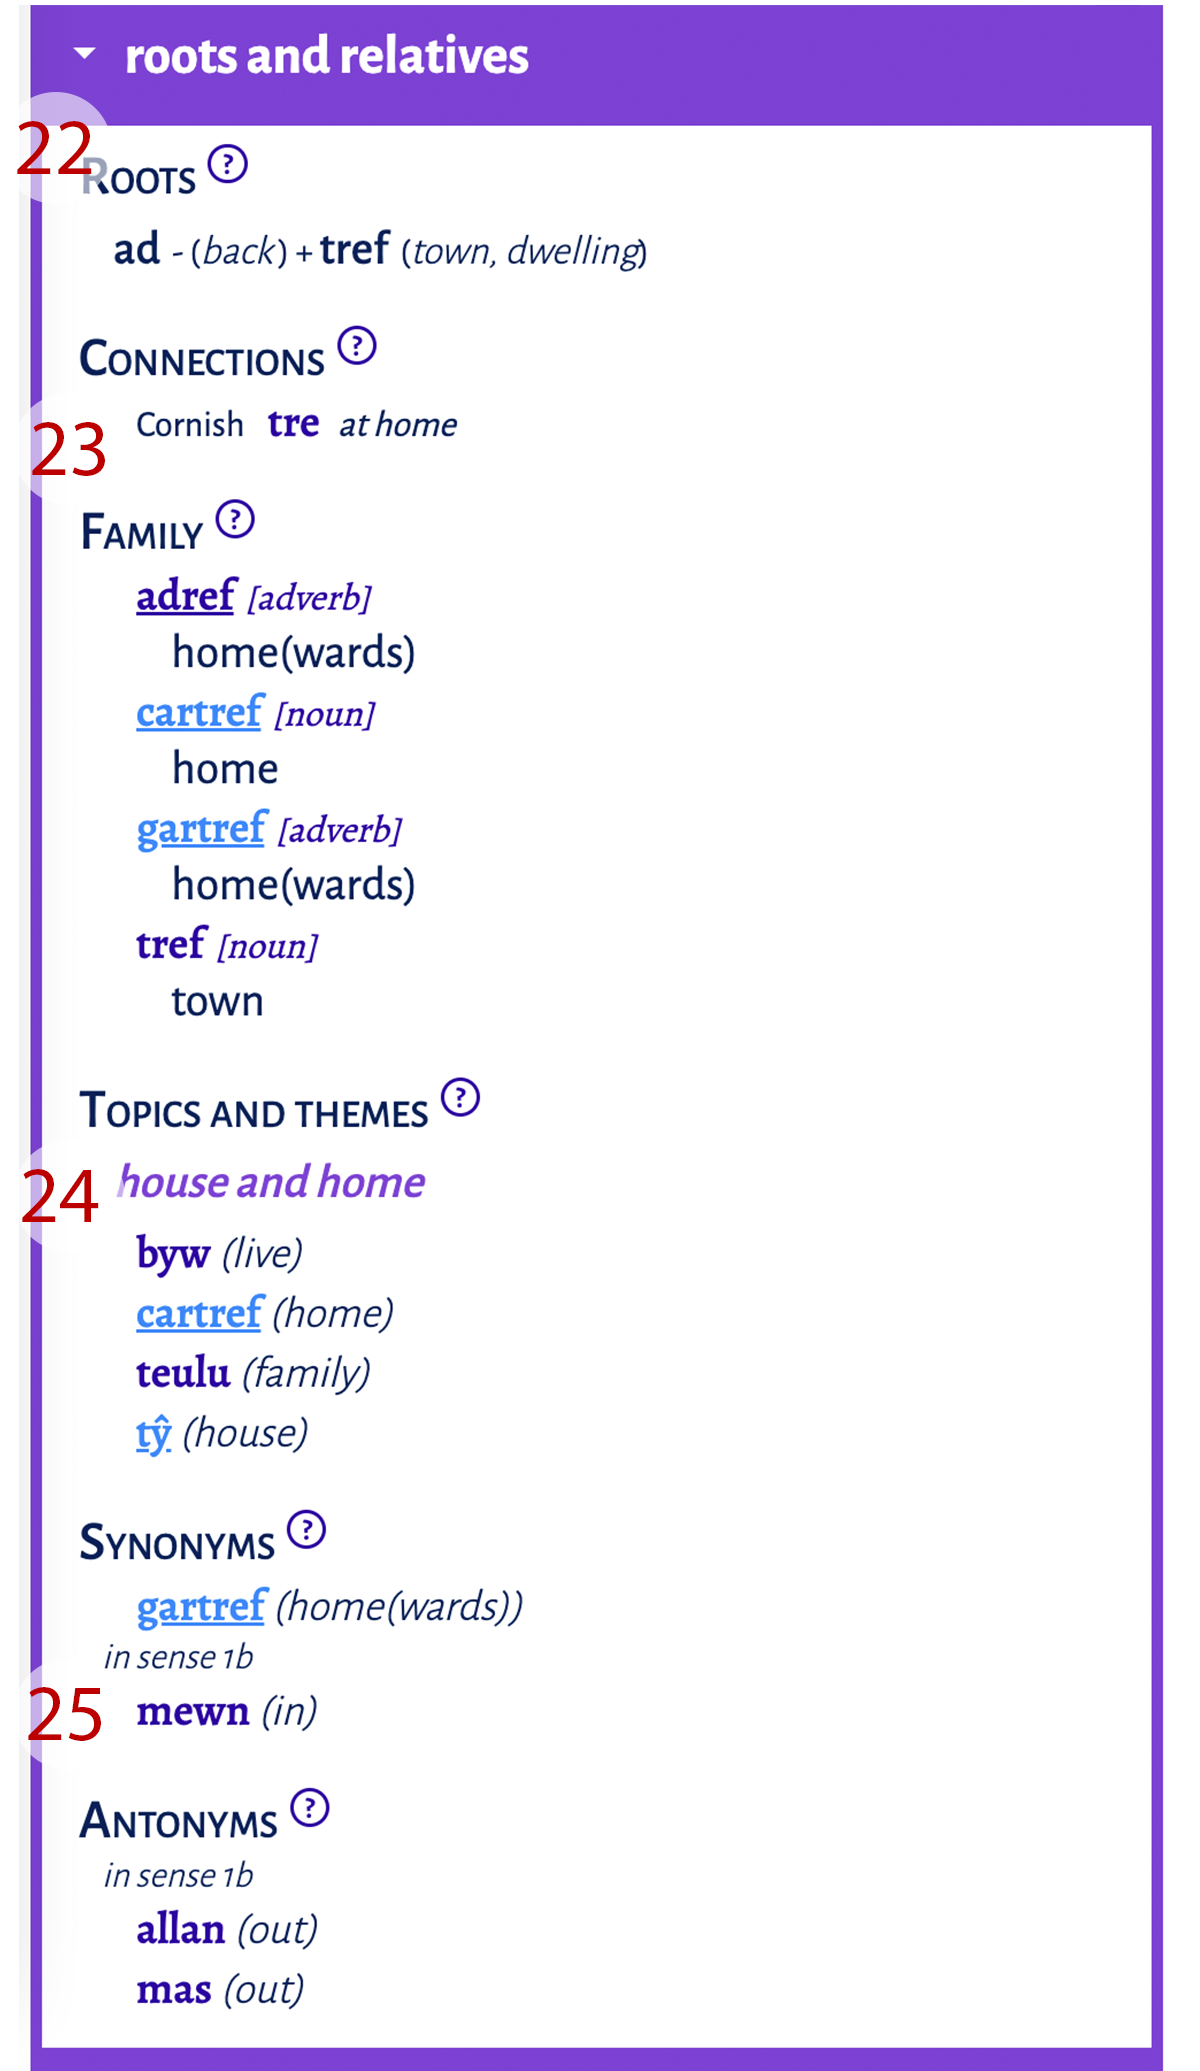 A numbered image of an extra information box labelled
    'roots and relatives'. The numbered items are: 22 - the heading 'roots'; 23 - the heading
    'connections'; 24 - the heading
    'family'; 25 - the headings
    'synonyms' and
    'antonyms'.